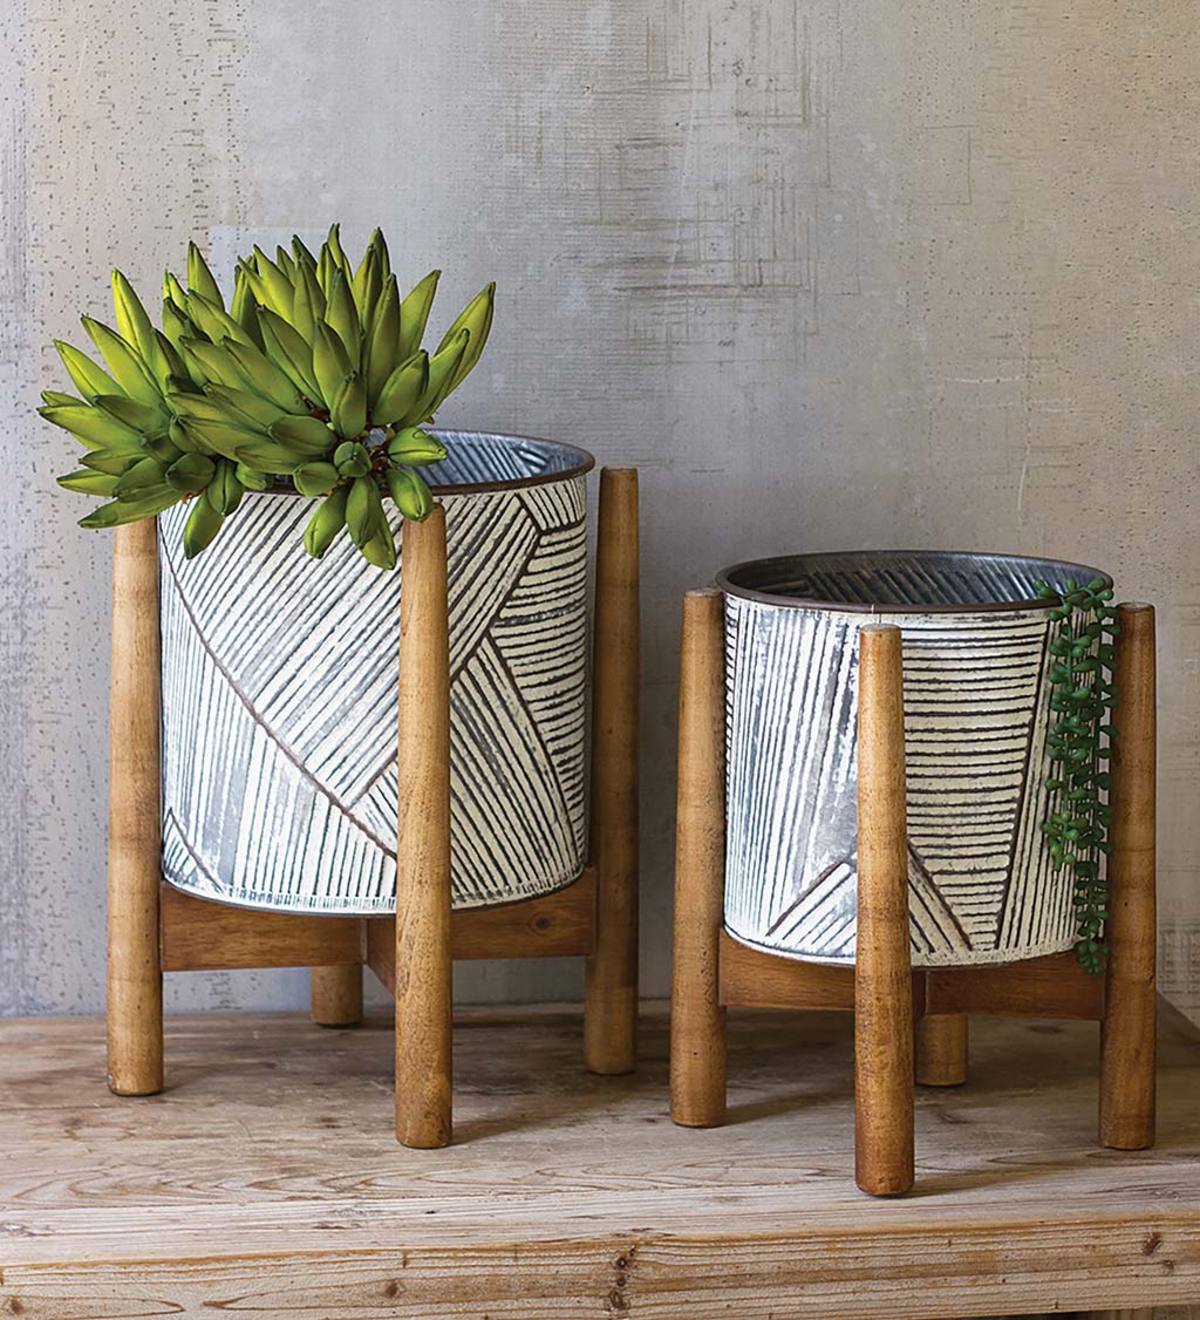 Set of 2 Etched Metal Planters on Stands